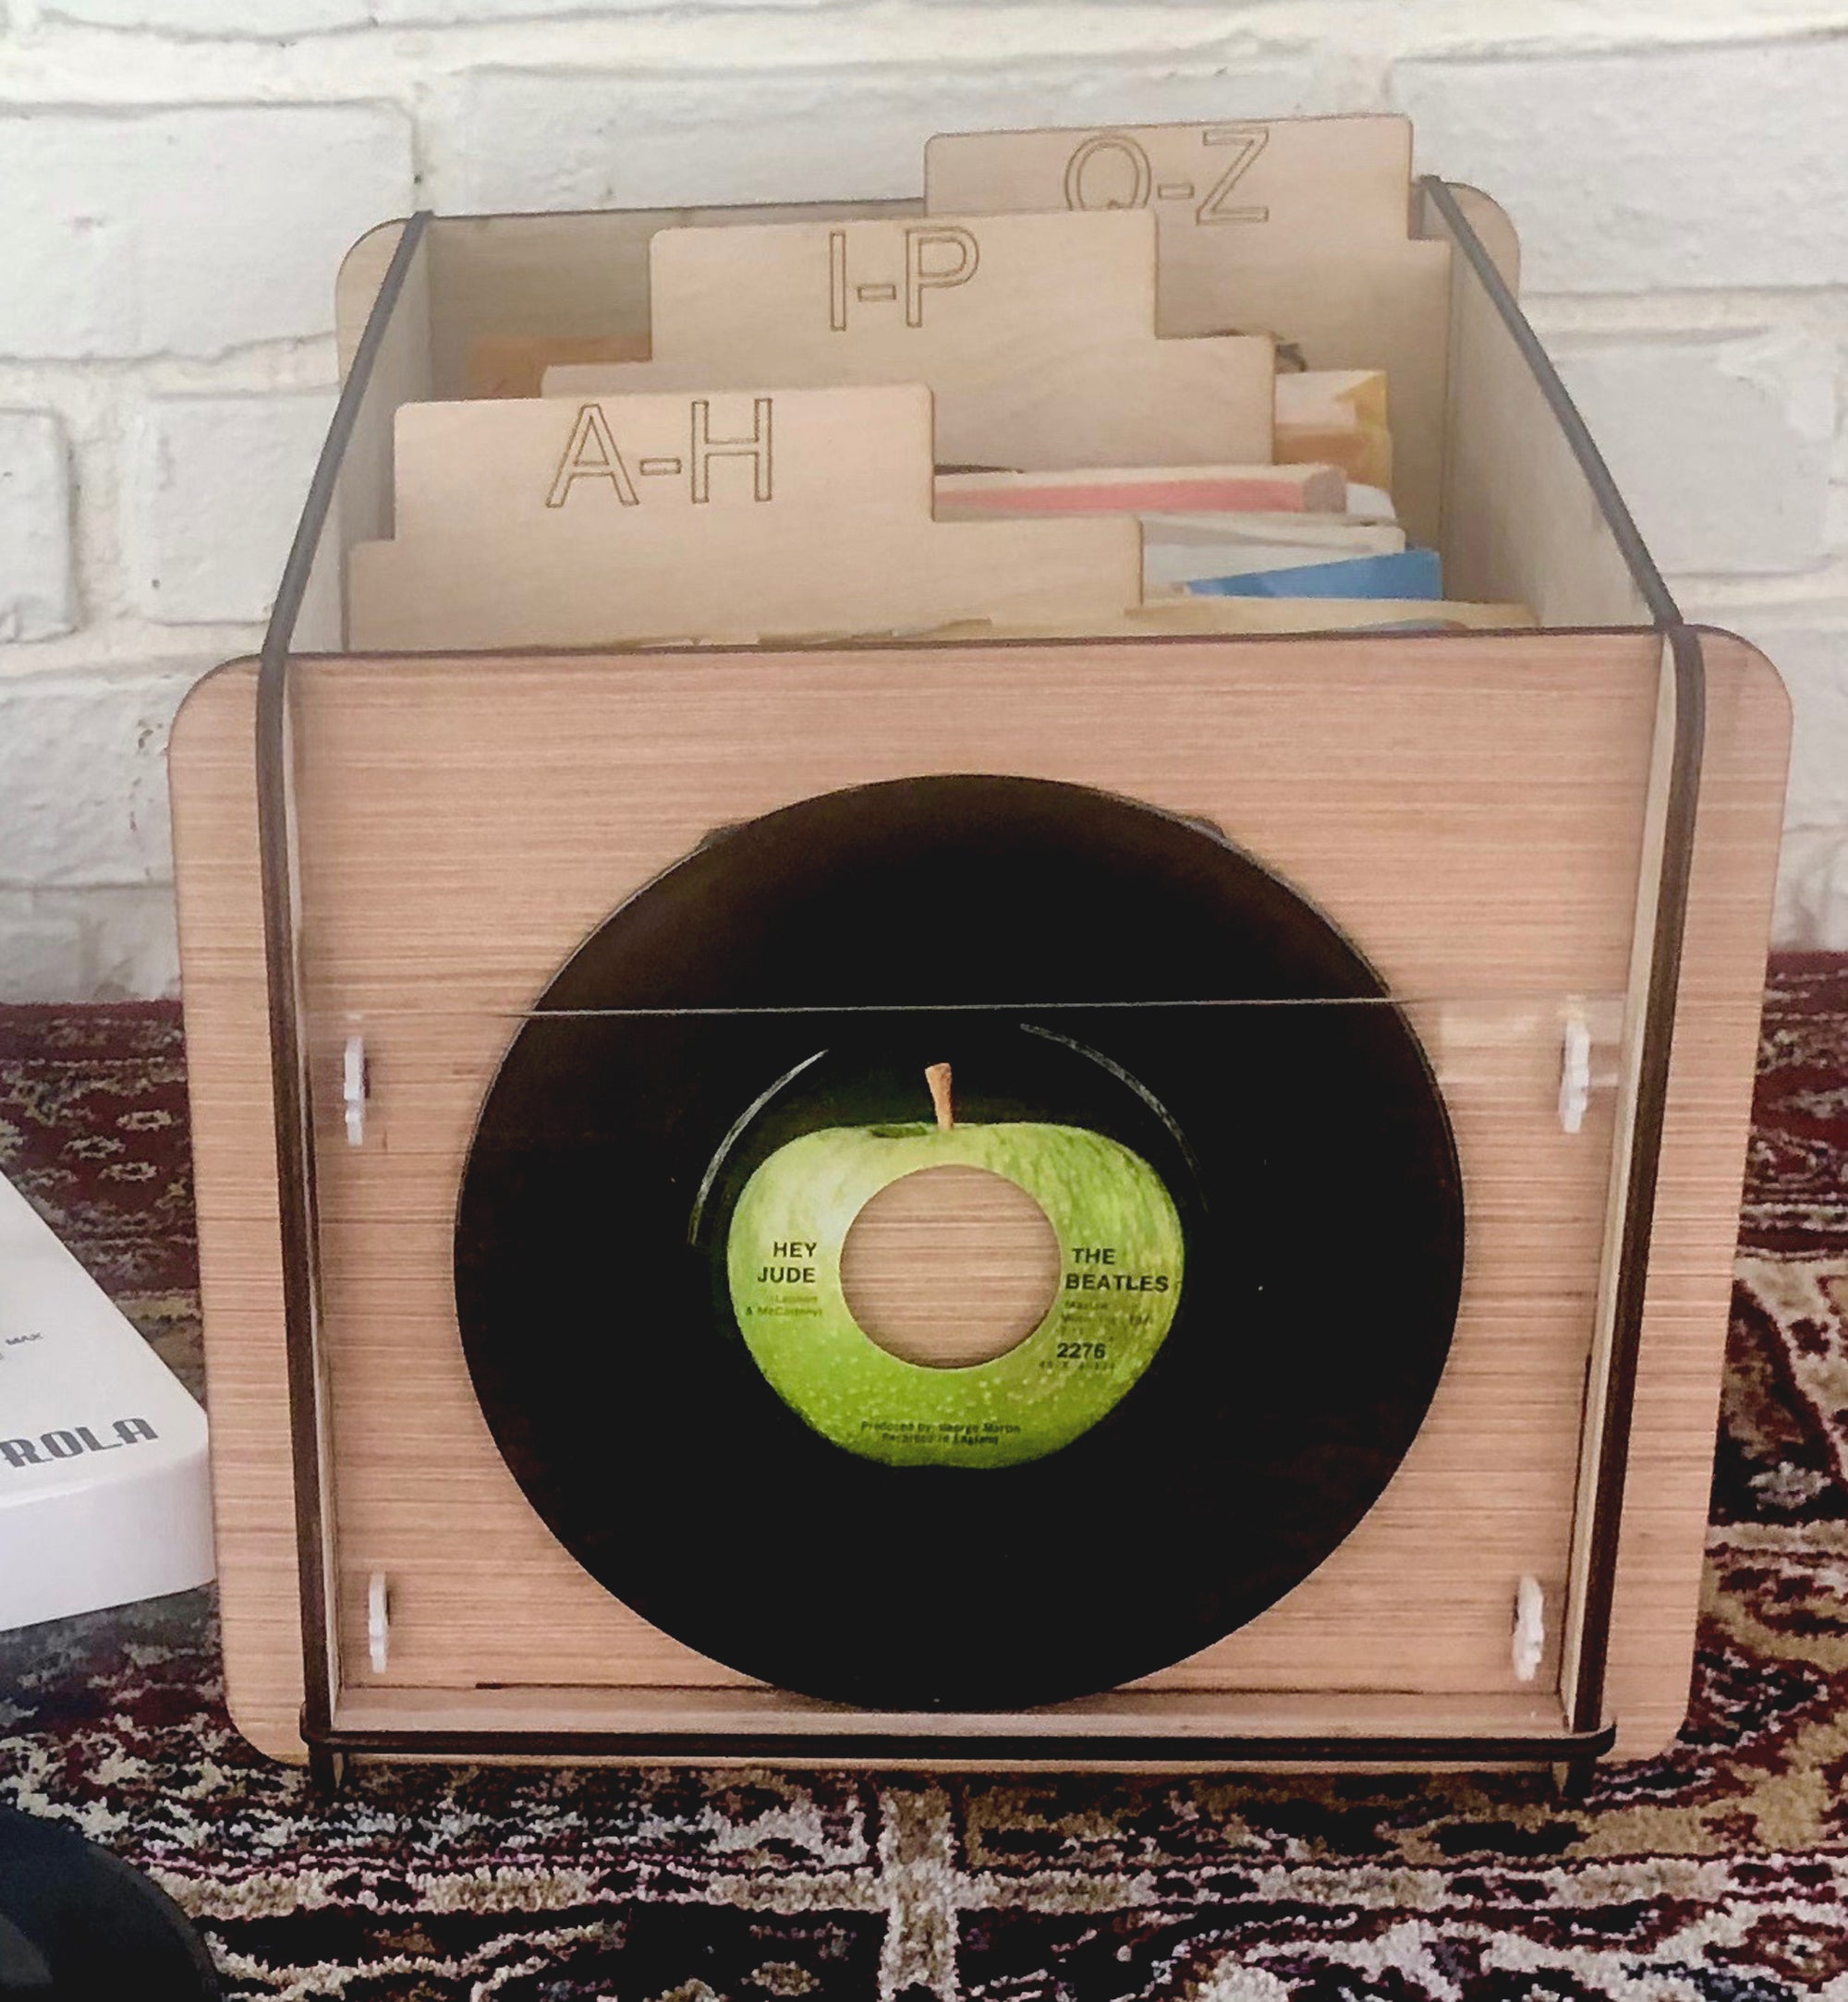 Perfect for Dorm or Studio - Great Gift! - Vinyl LP Record Storage Crate  with Black Bird